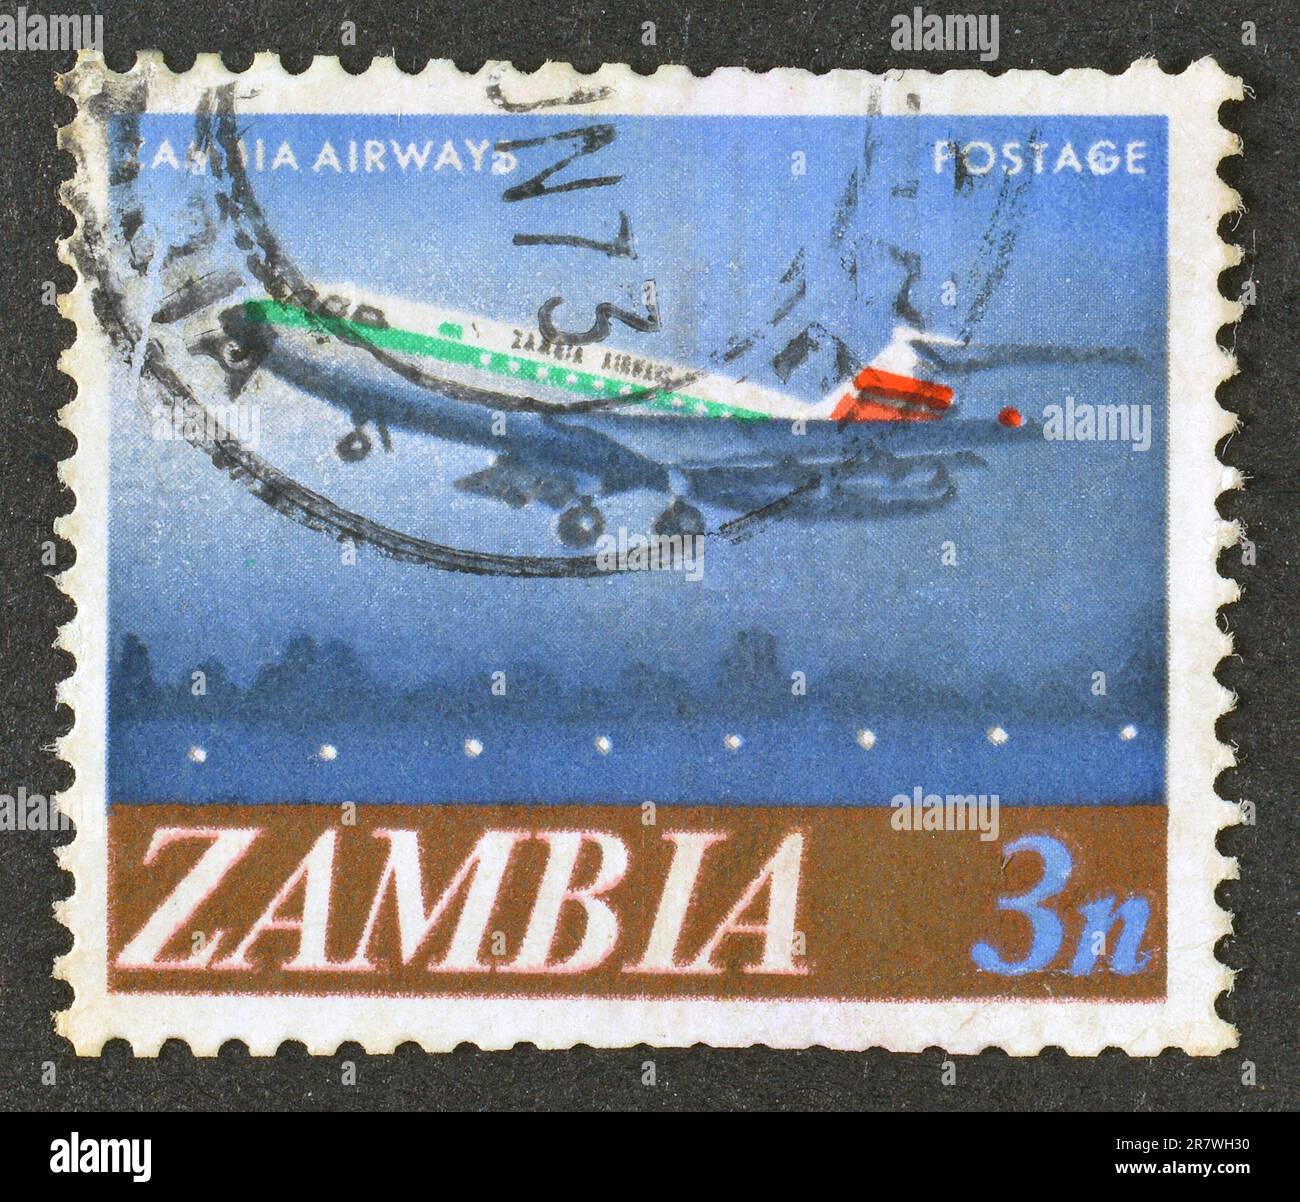 Cancelled postage stamp printed by Zambia, that shows Zambia Airways Vickers VC-10 jetliner, circa 1968. Stock Photo